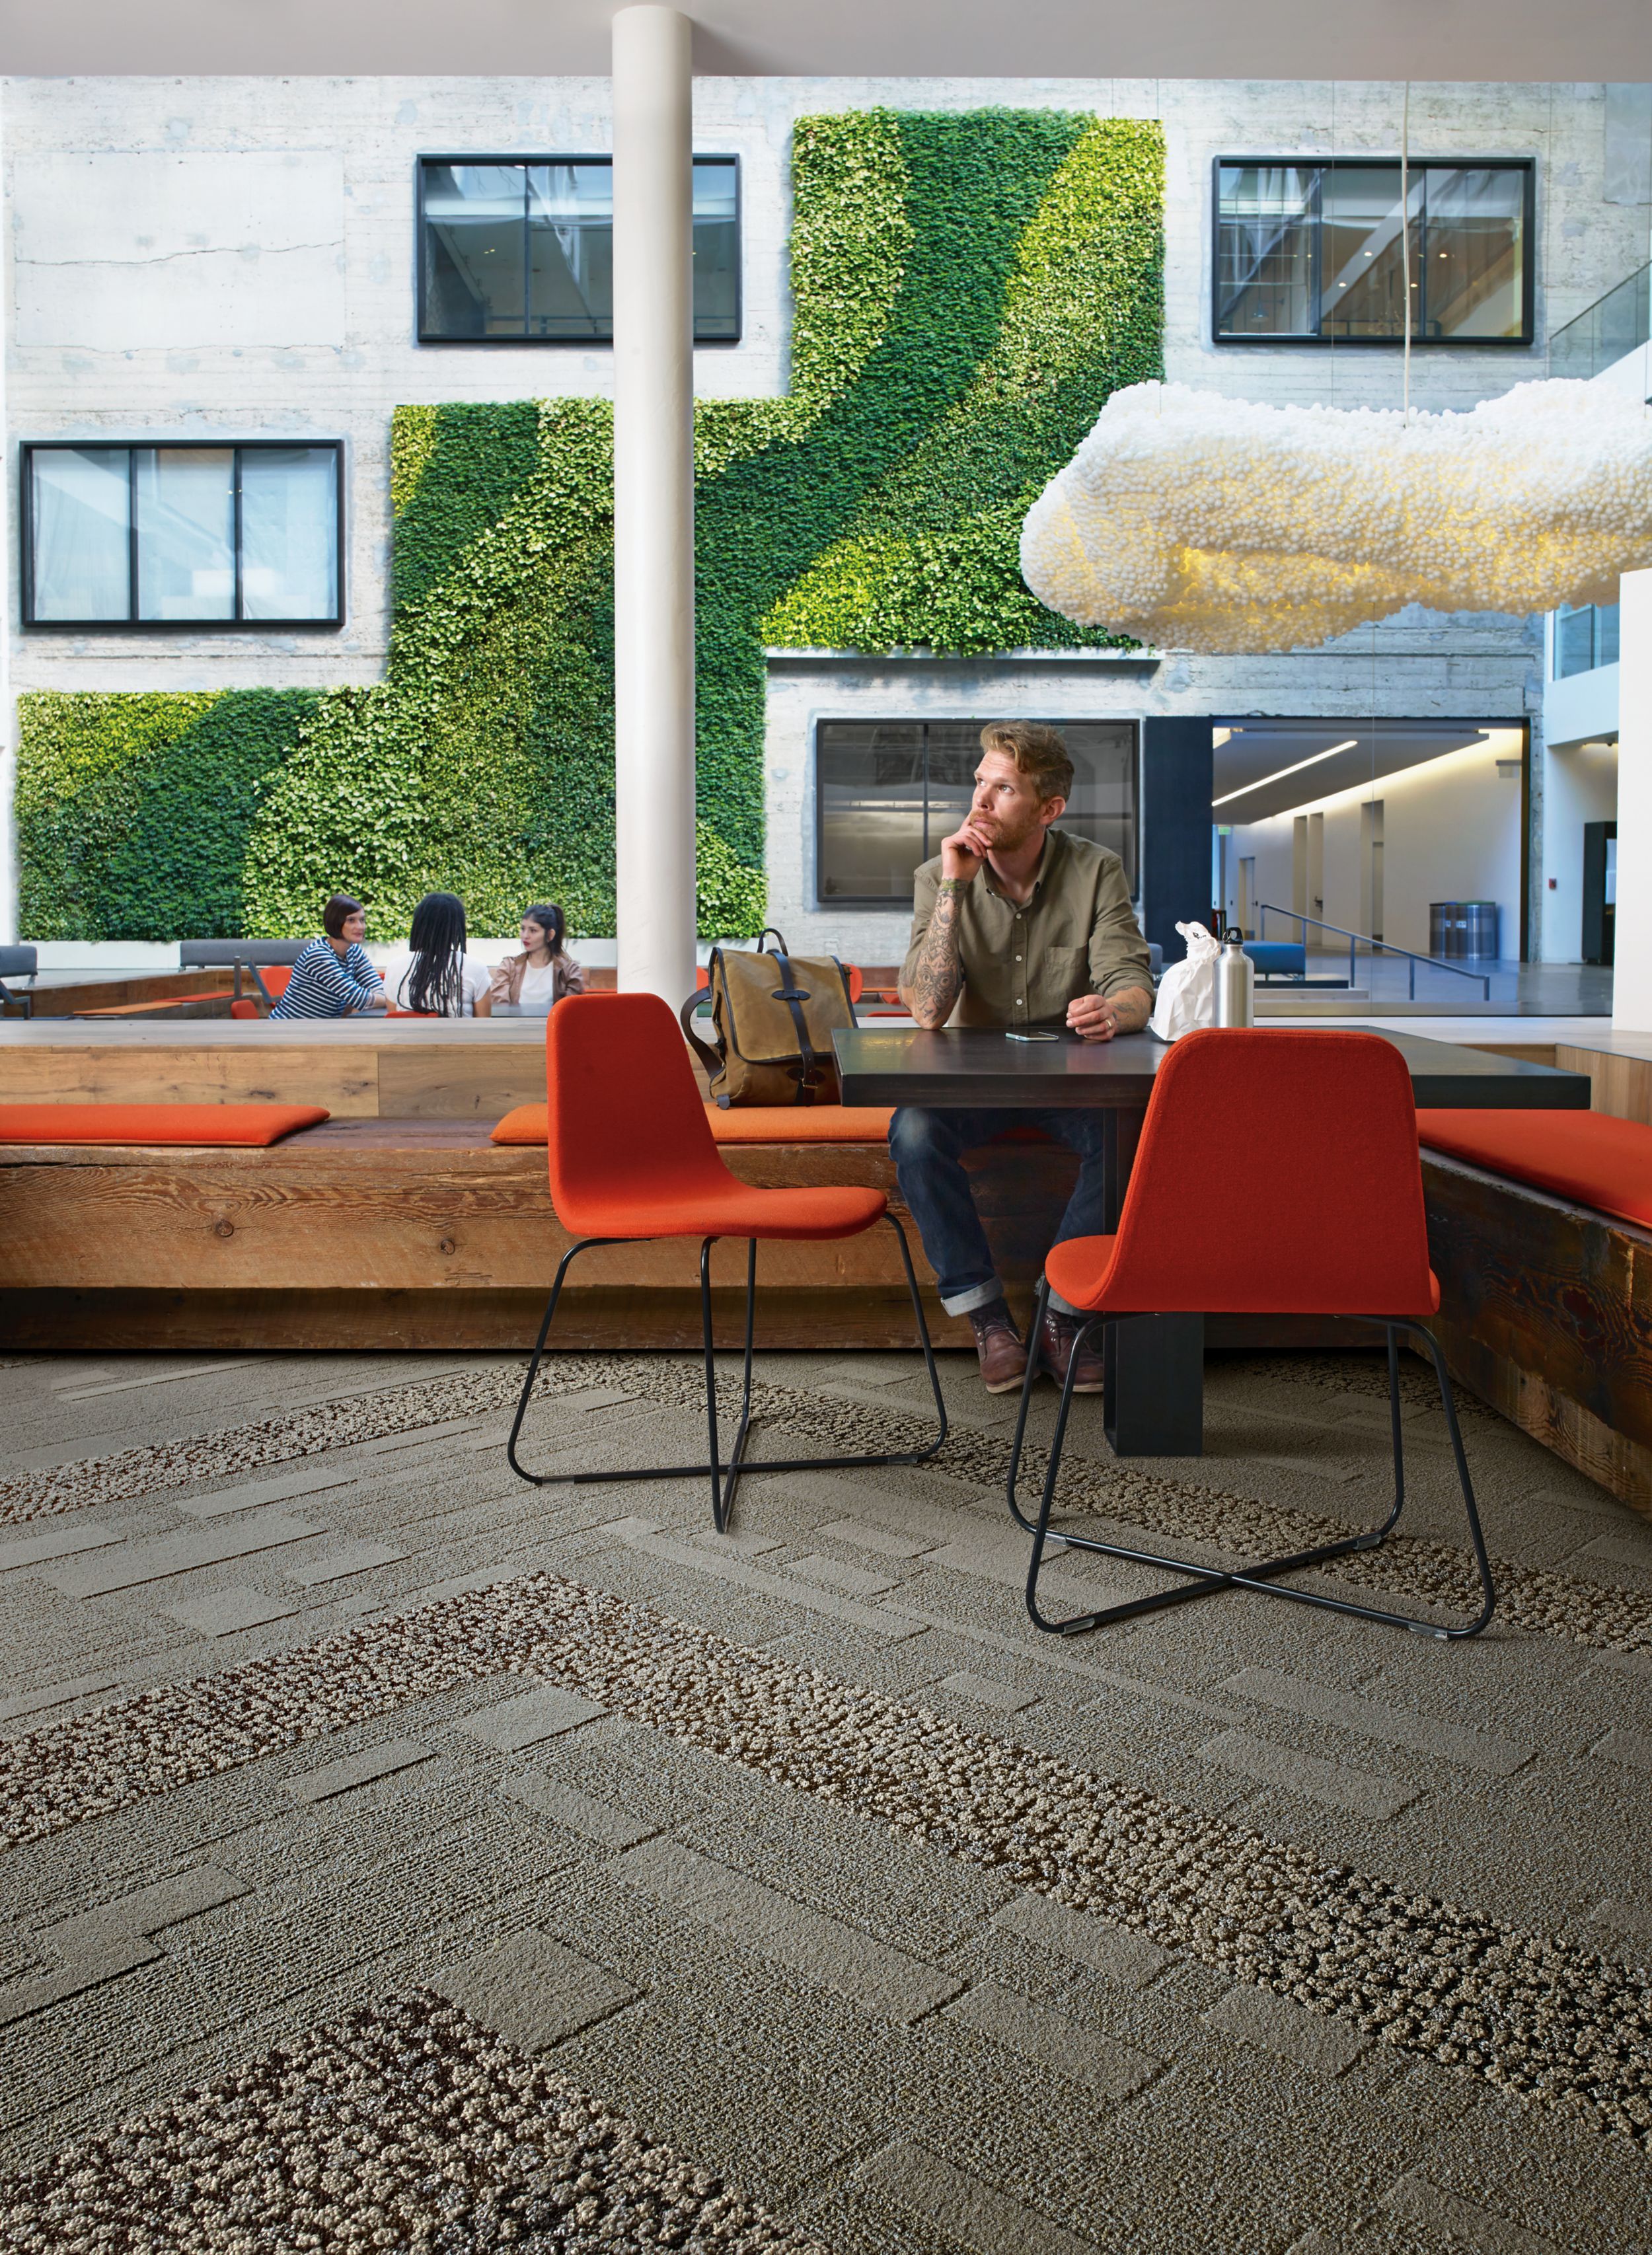 Interface EM552 plank carpet tile with man sitting at table with lunch and group meeting in front of vine wall in the background  número de imagen 3